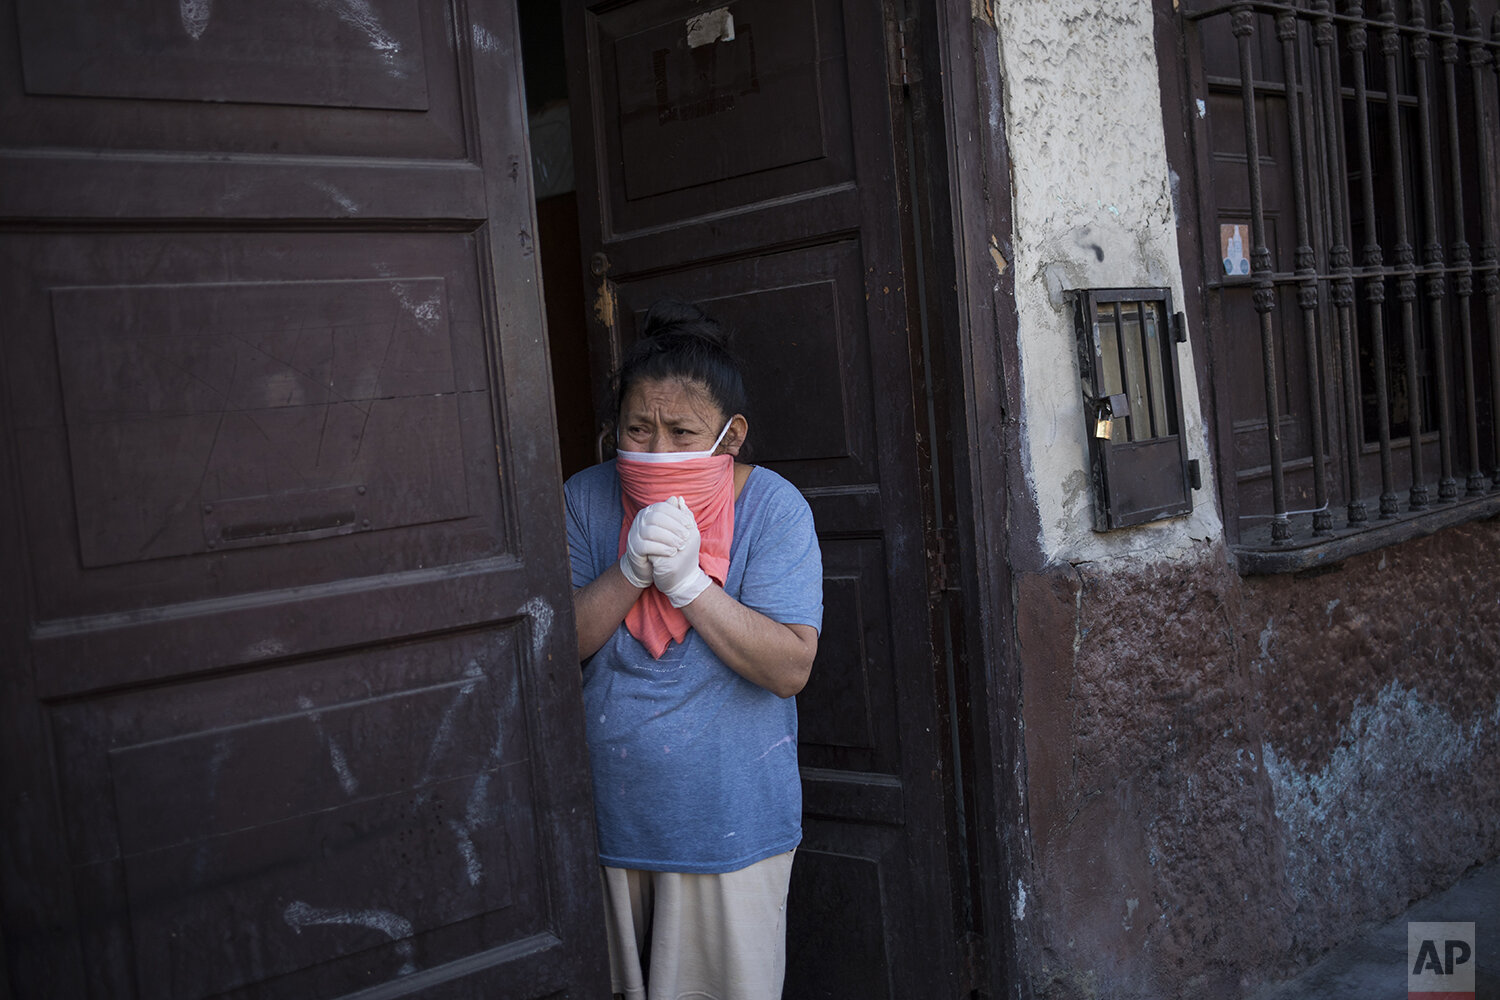  In this May 9, 2020 photo, Palmira Cortez, 65, mourns while looking at funeral home works carrying the corpse of her husband  Walter YarlequÈ, 79, who died allegedly from COVID-19, un Lima, Peru. (AP Photo/Rodrigo Abd) 